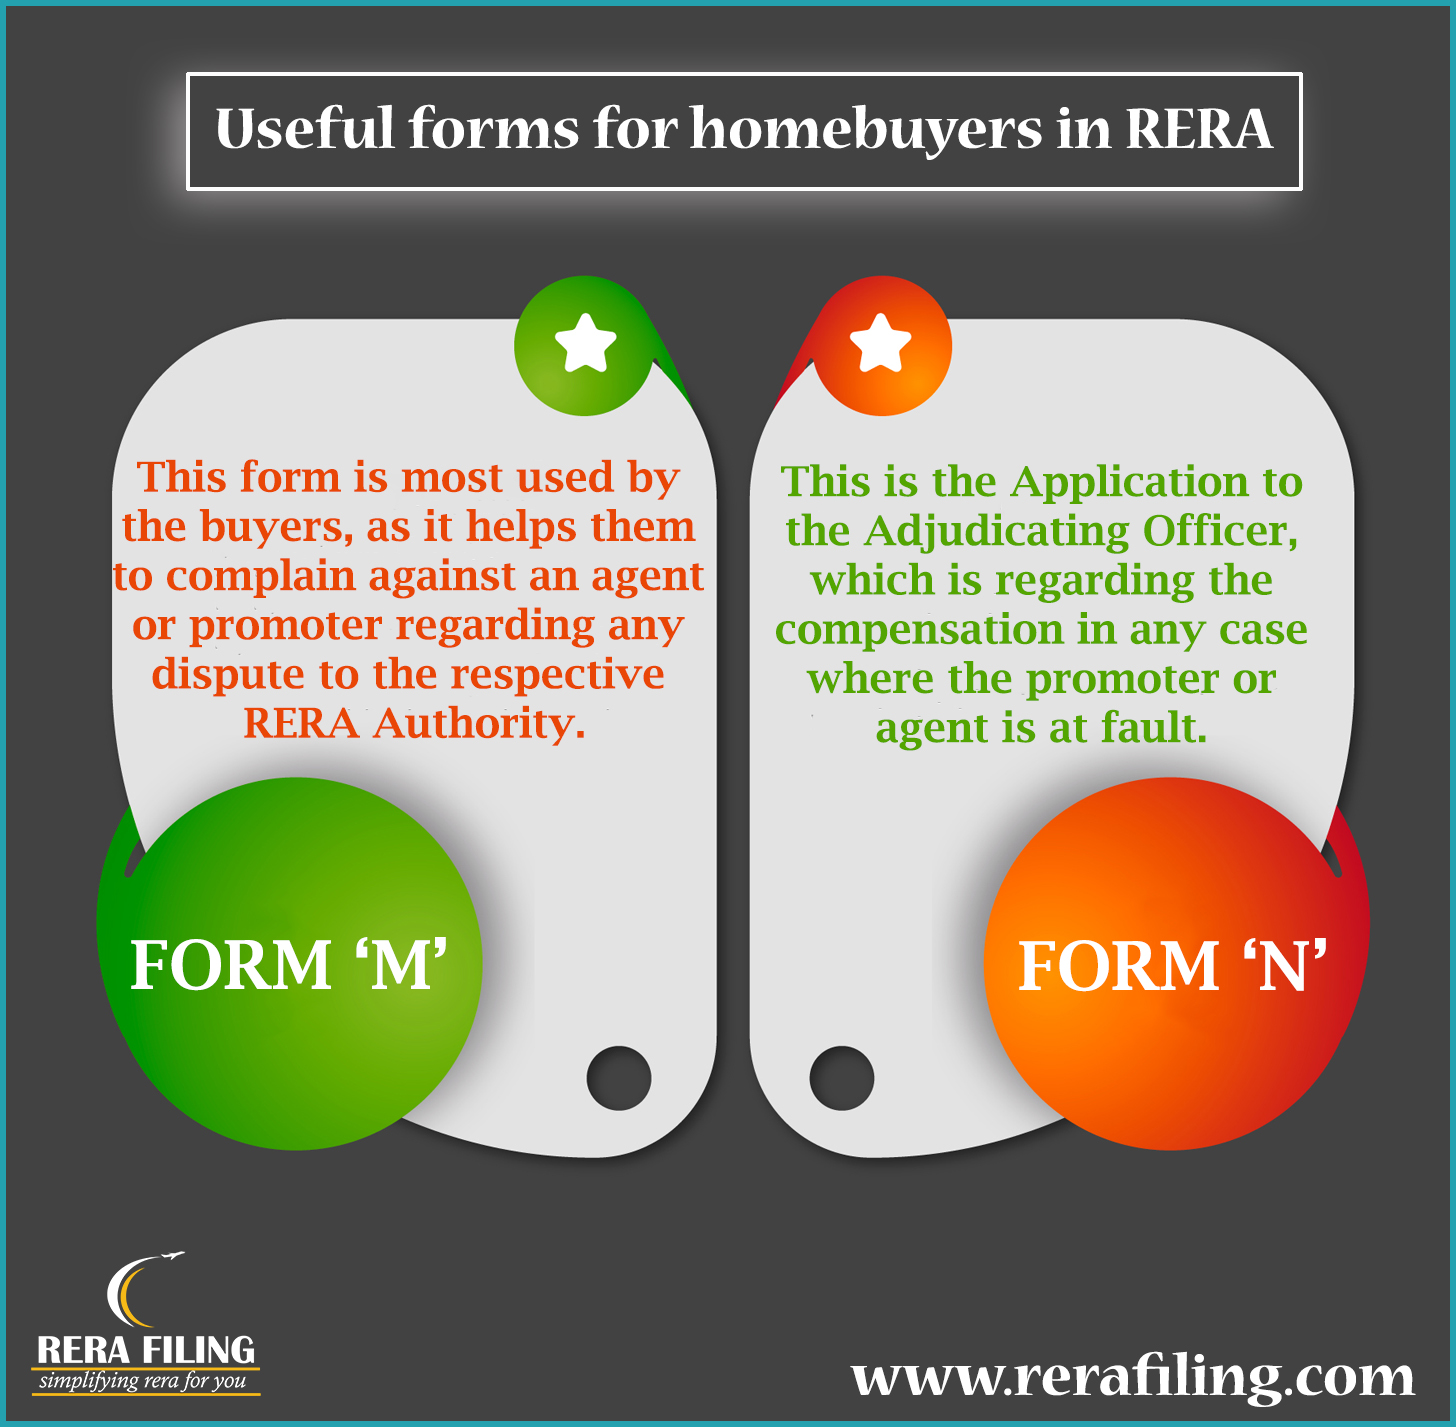 Useful forms for homebuyers in RERA